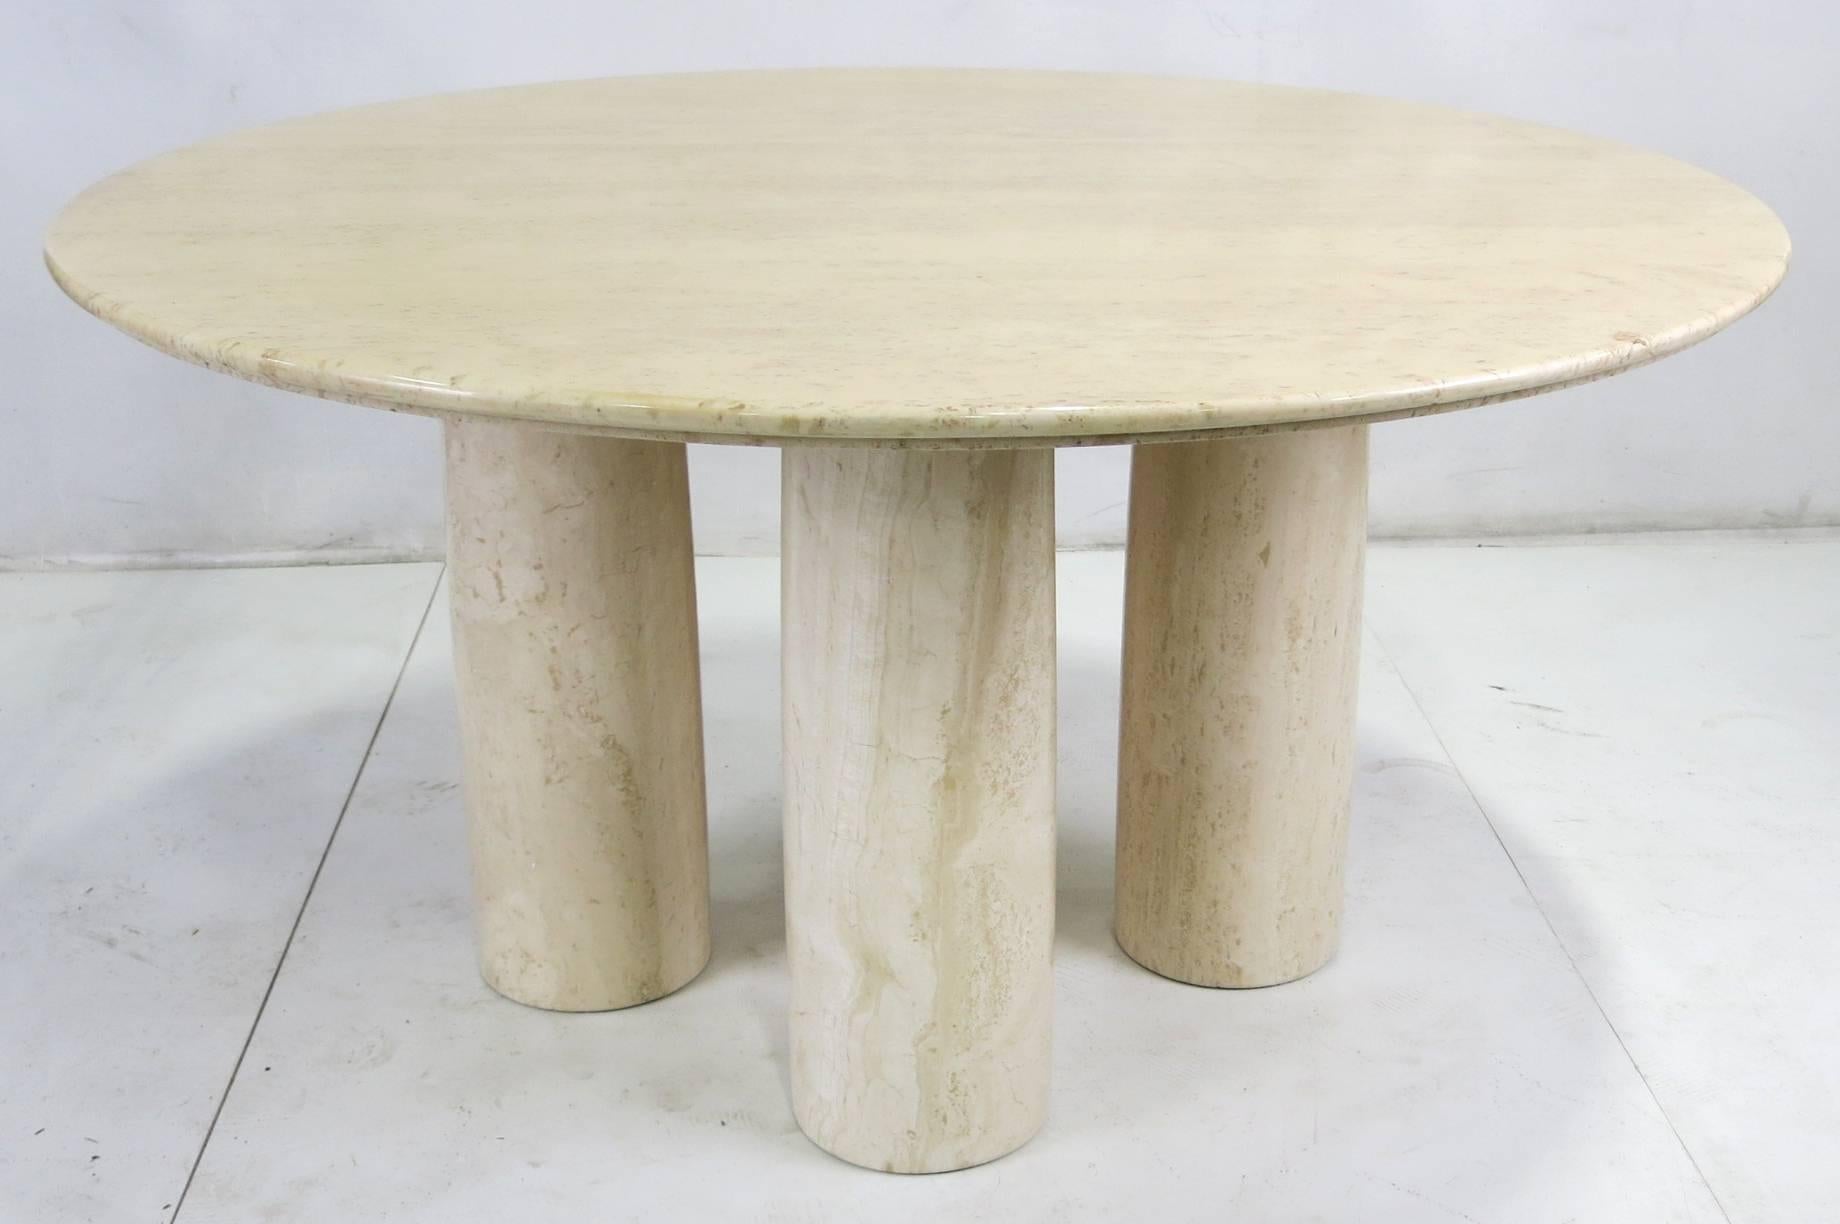 Stunning and rare II Colonnato dining table in solid Travertino Romano by Mario Bellini for Cassina, circa 1977. This rare table was only made for a few years, from 1977 through 1980. The Travertine table top with its Ogee edge is raised on five